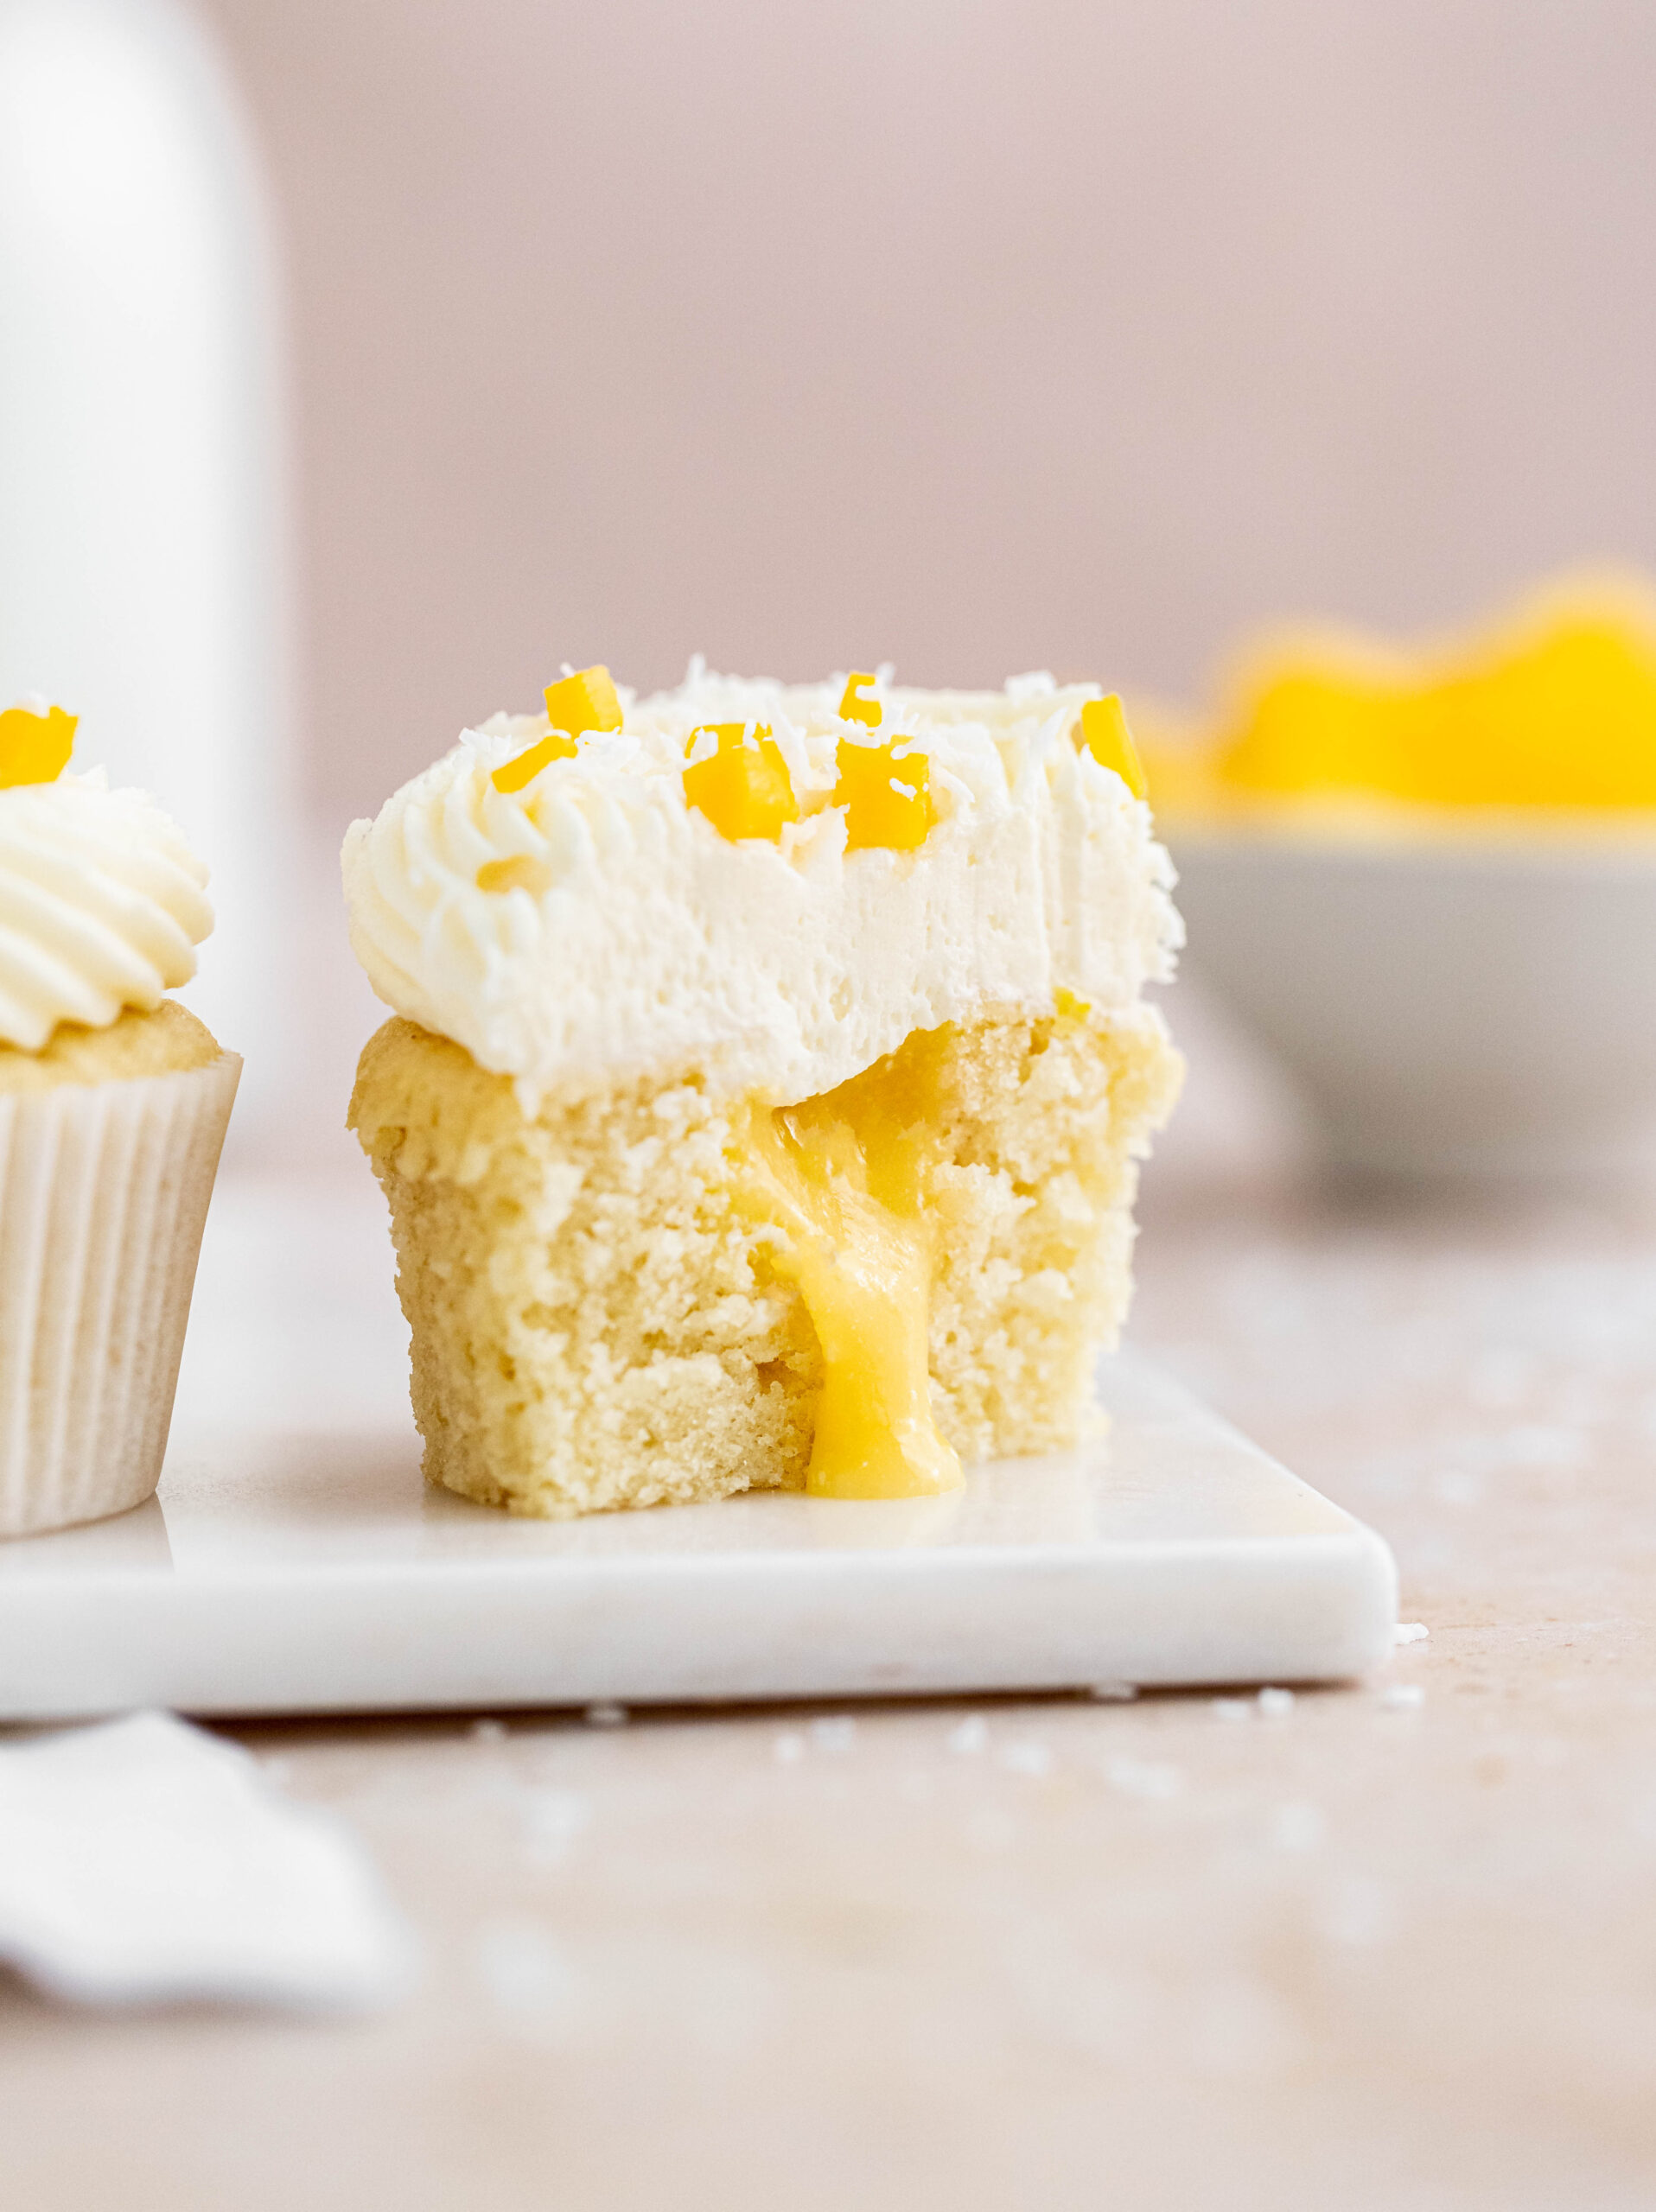 Coconut cupcake cut in half with mango curd spilling out.